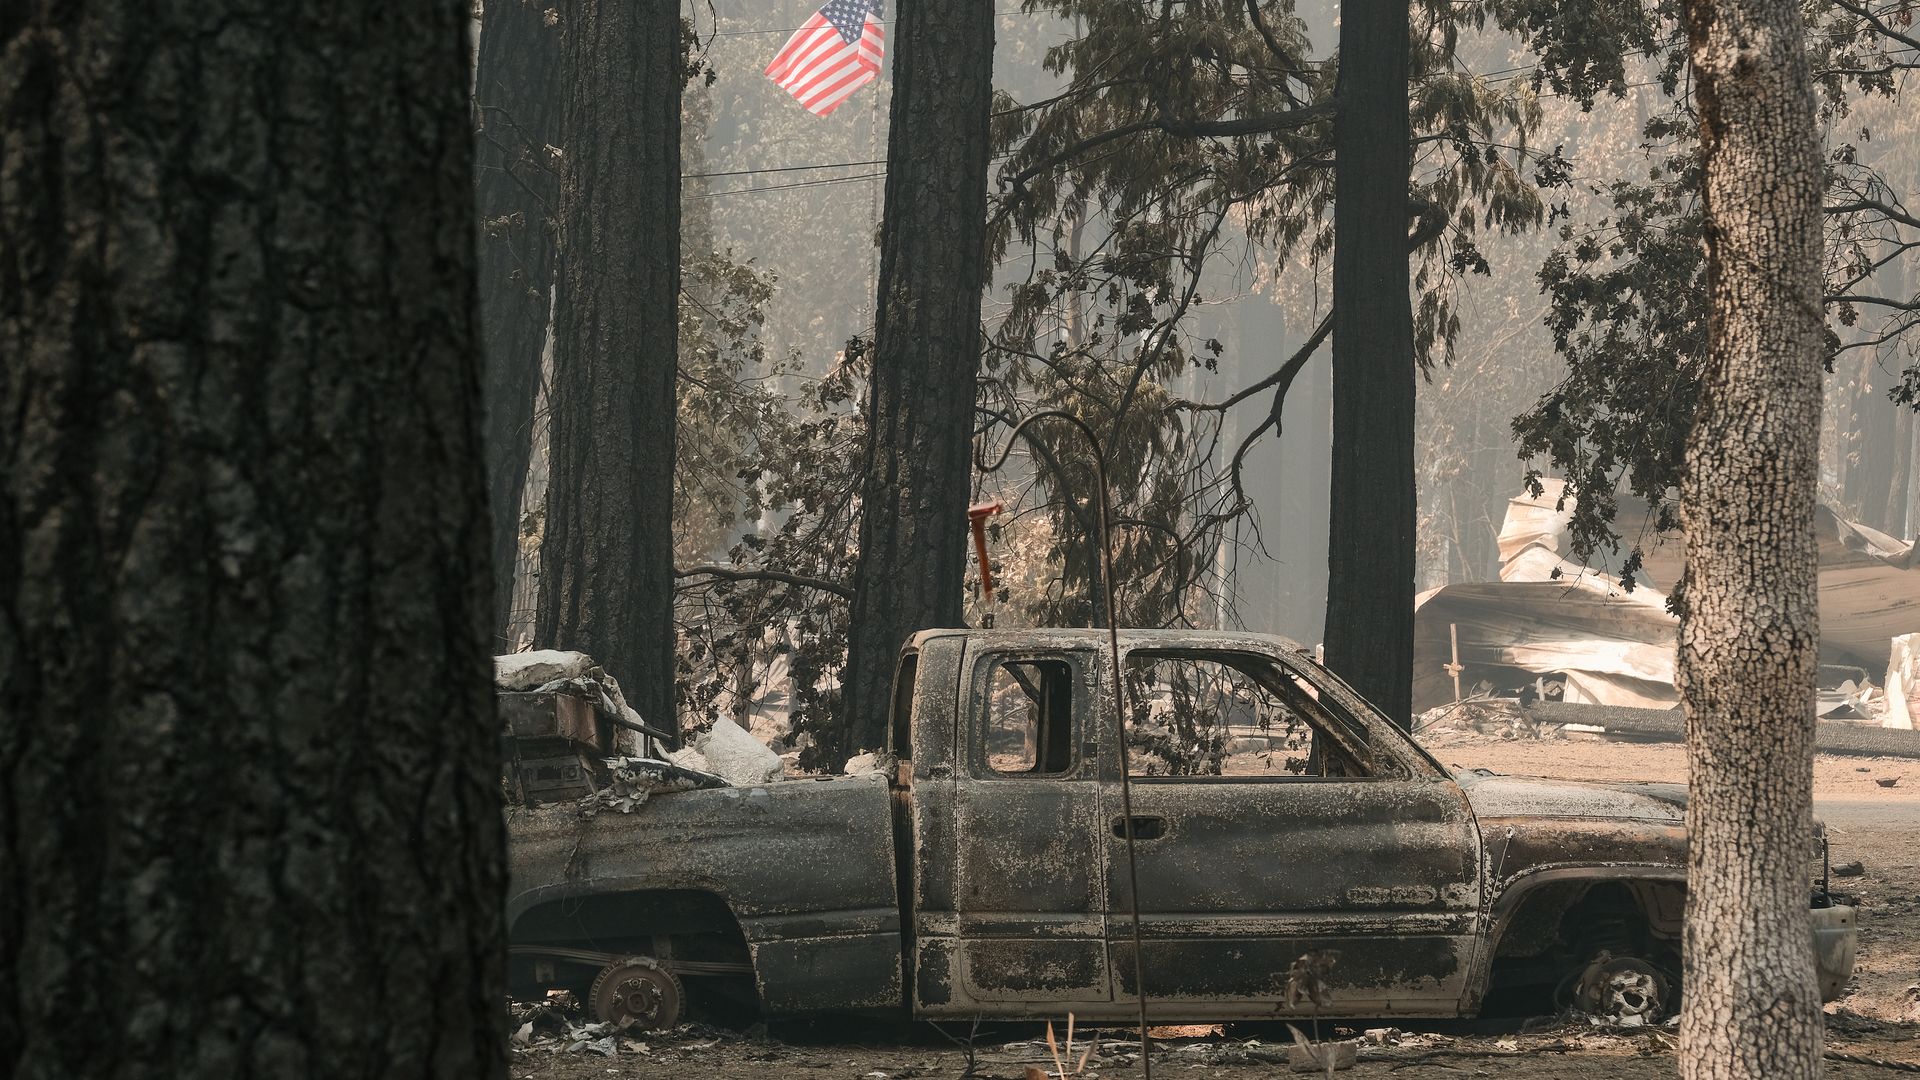 A burned vehicle sits among destroyed structures caused by the Dixie Fire on August 9, 2021 situated near Highway 89 in Indian Falls, California. 